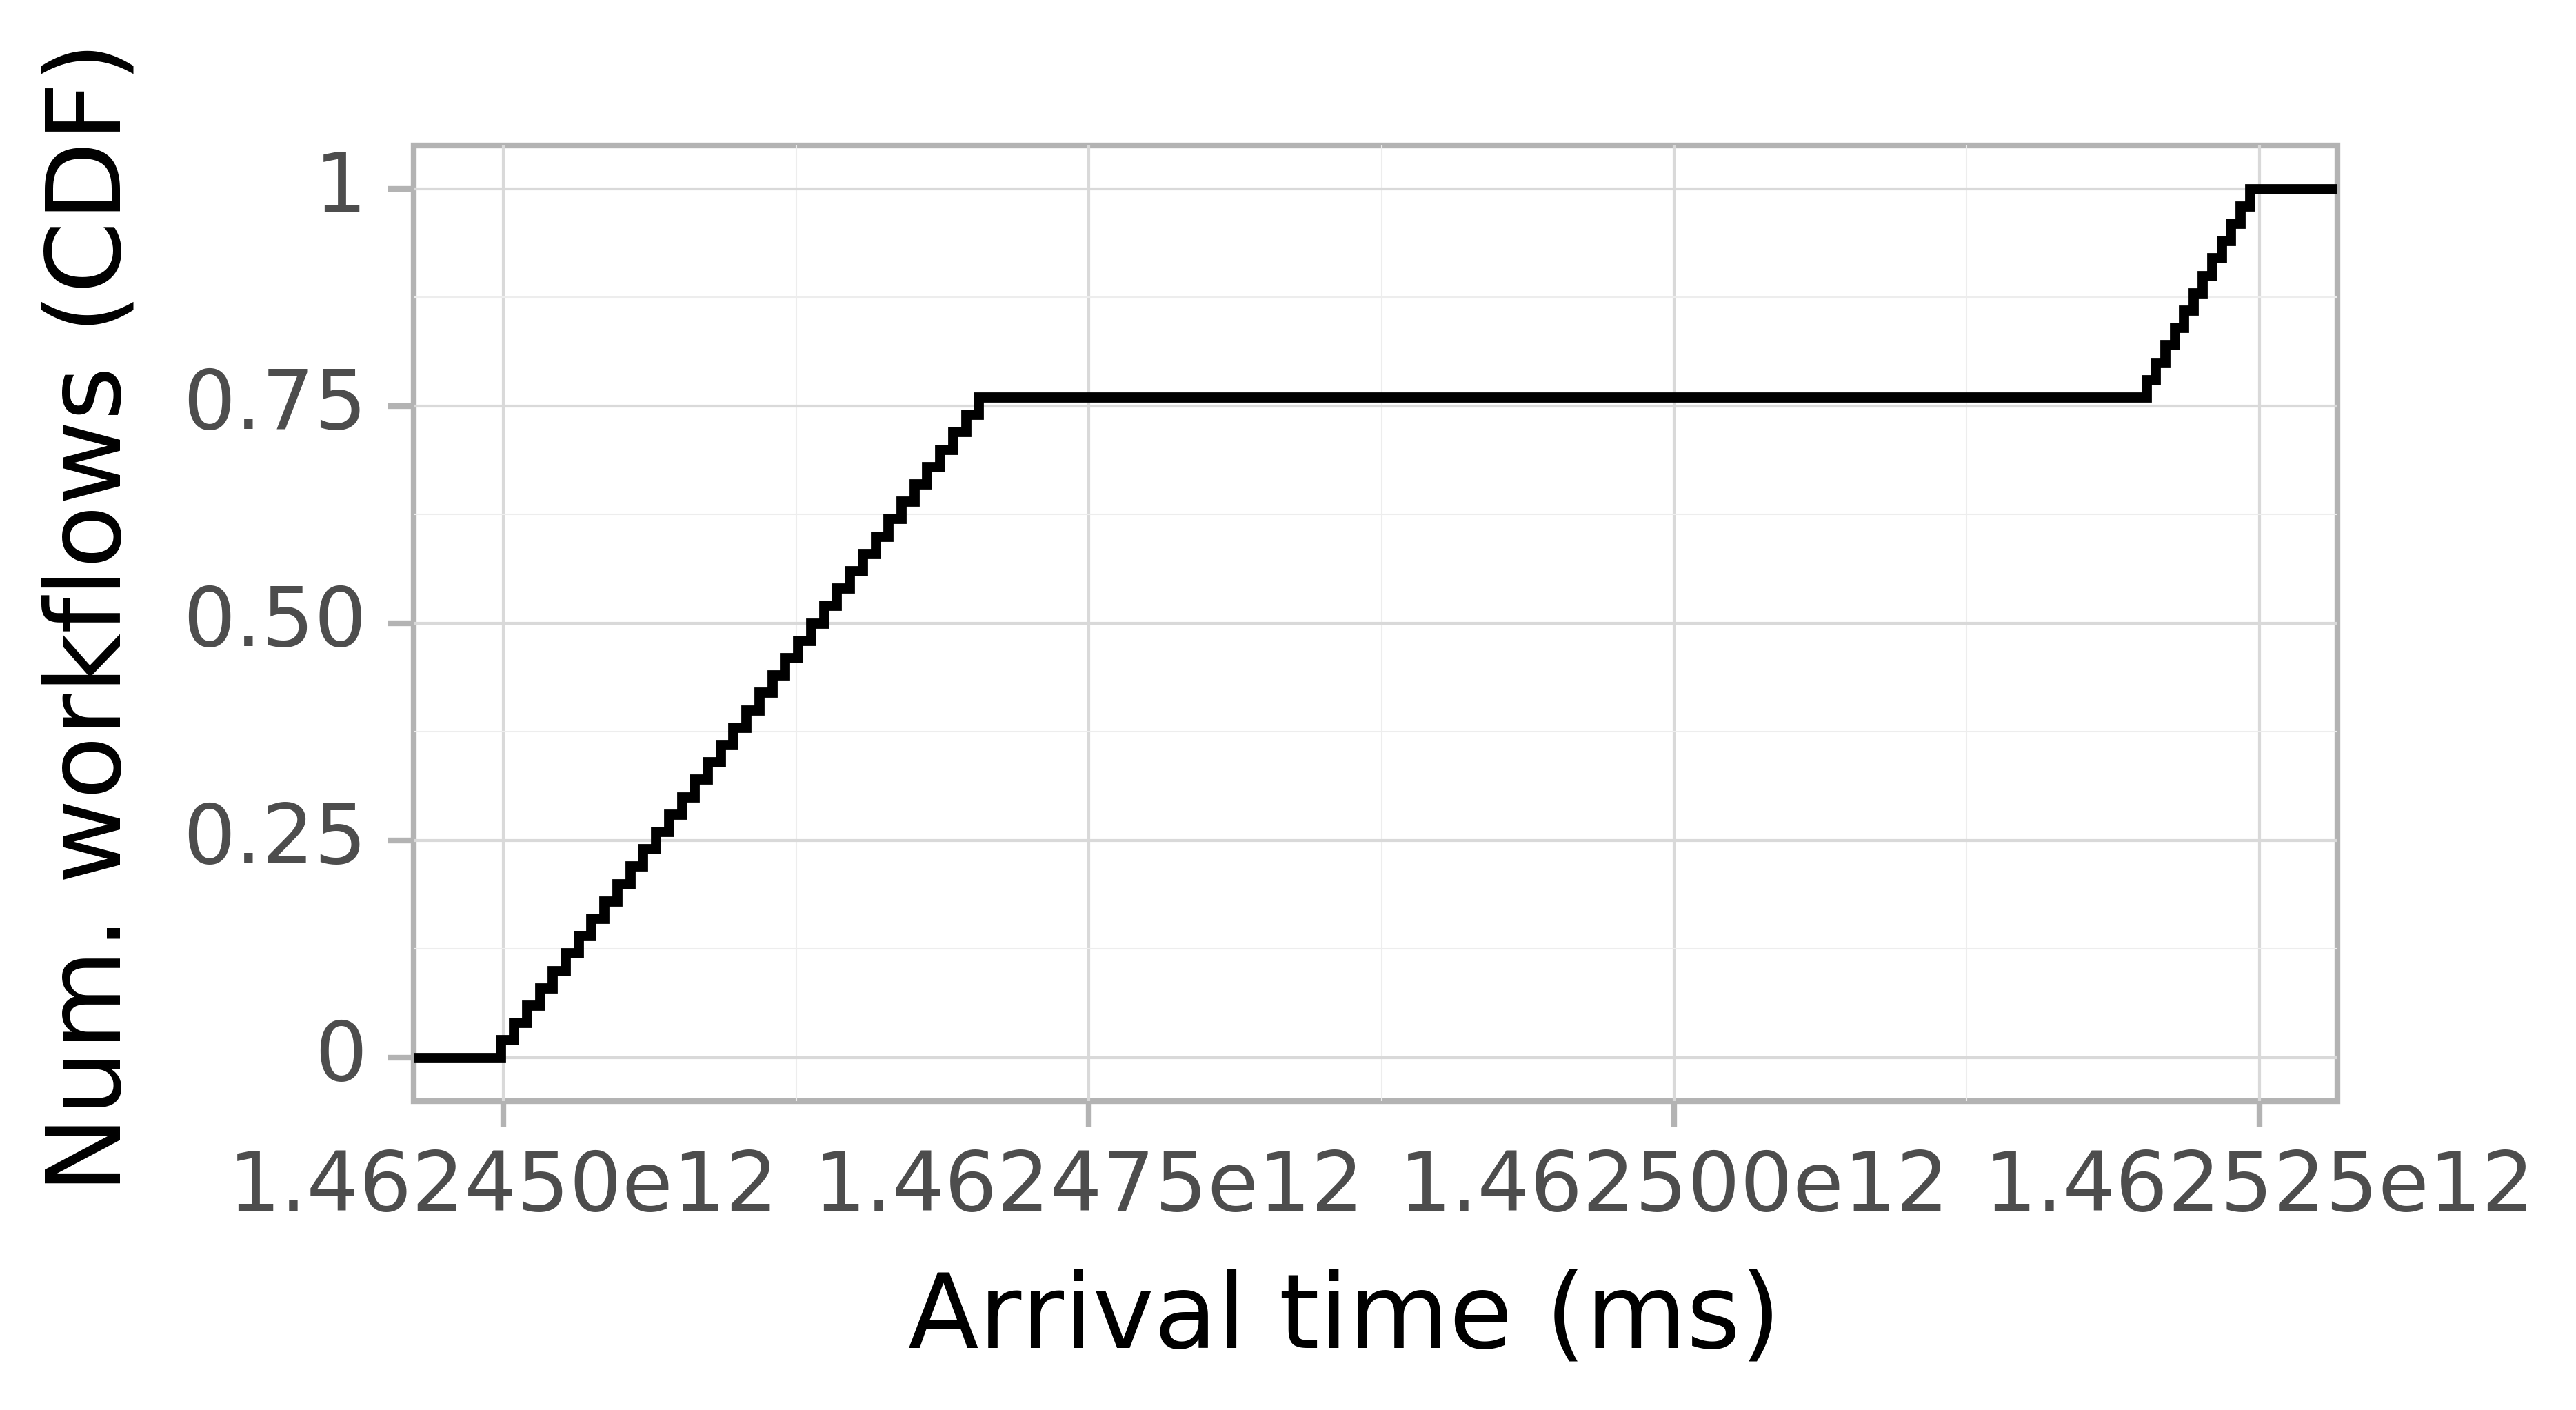 Job arrival CDF graph for the askalon-new_ee52 trace.